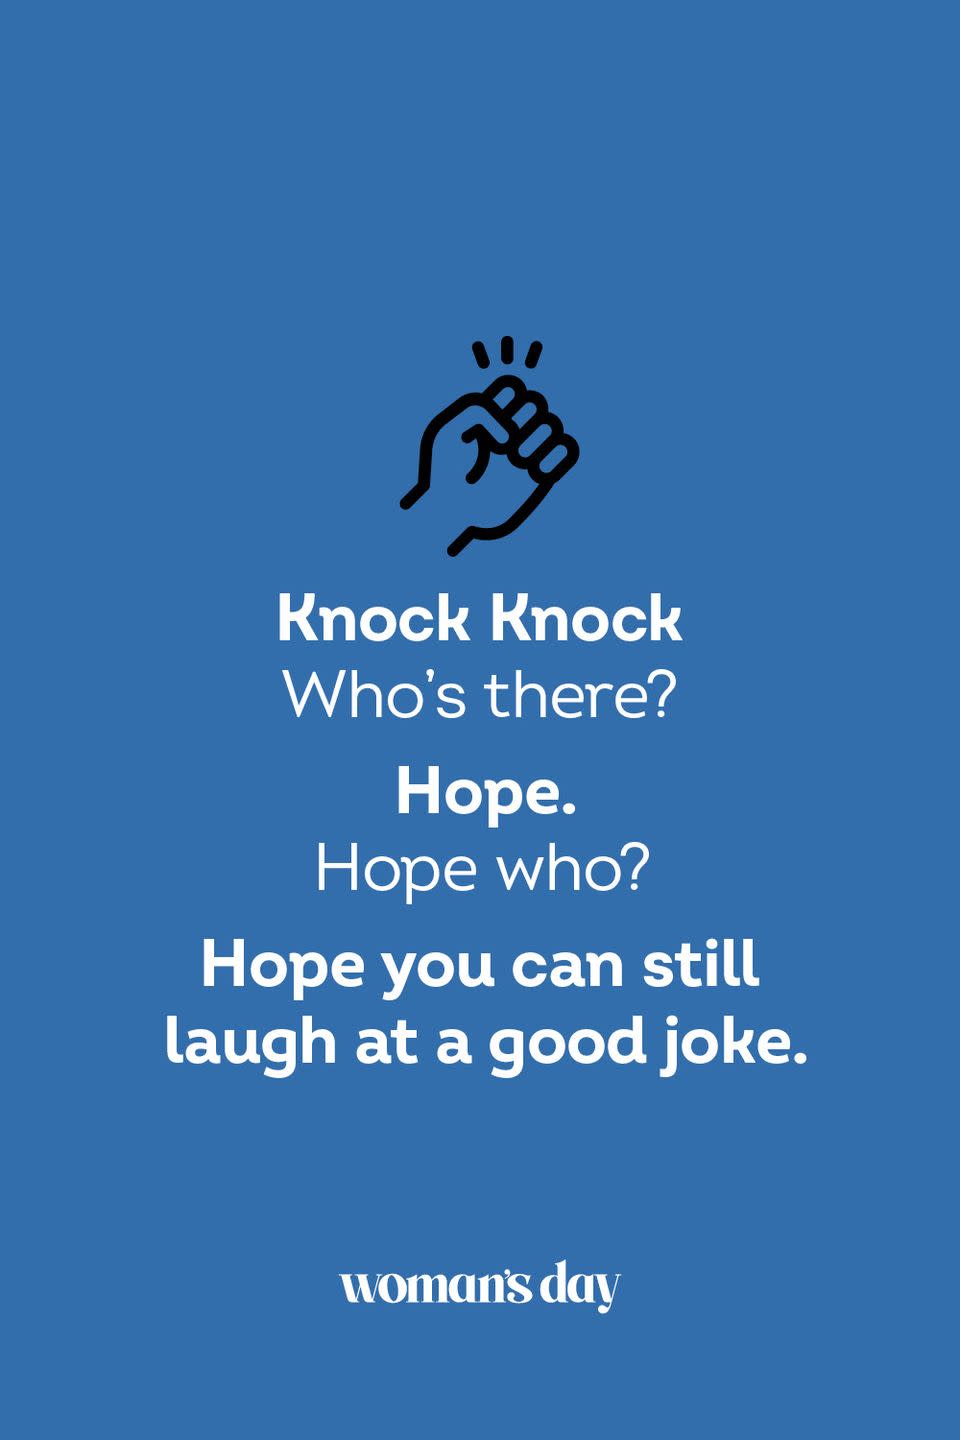 <p><strong>Knock Knock</strong></p><p><em>Who’s there? </em></p><p><strong>Hope.</strong></p><p><em>Hope who?</em></p><p><strong>Hope you can still laugh at a good joke.</strong></p>